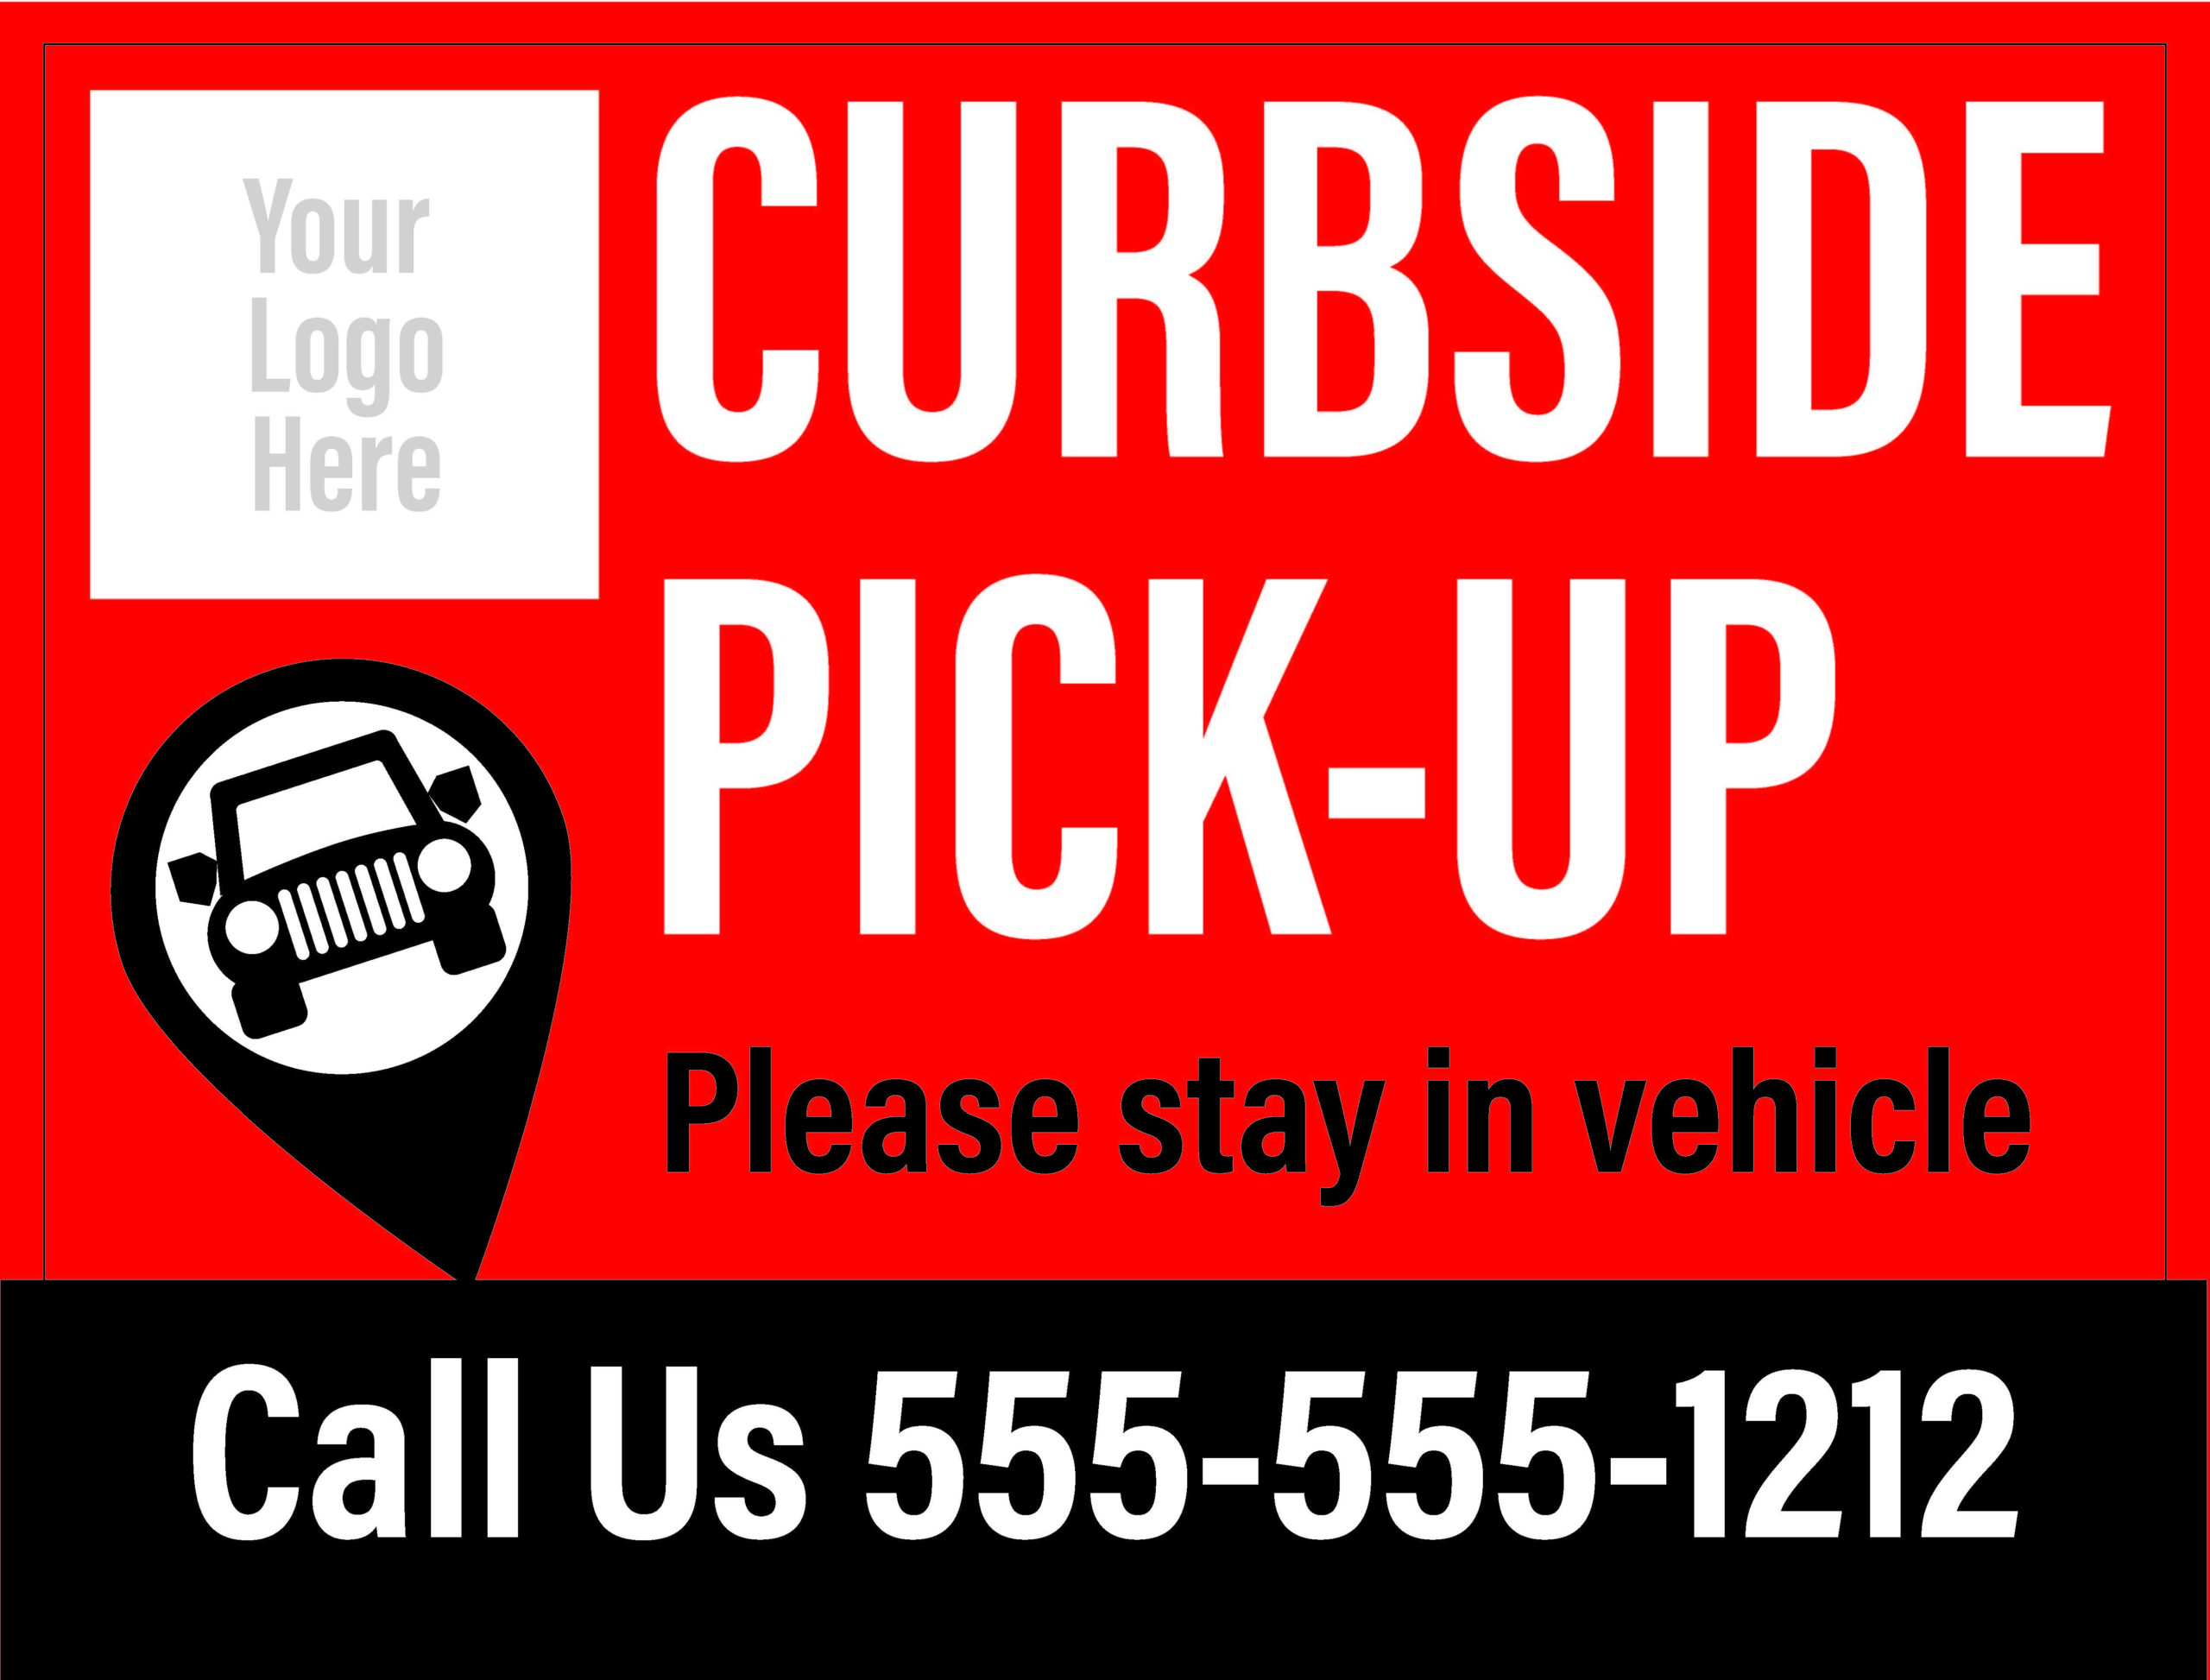 Curbside Pickup Signs 24”x 18”, printed on White Coroplast (outside) #3